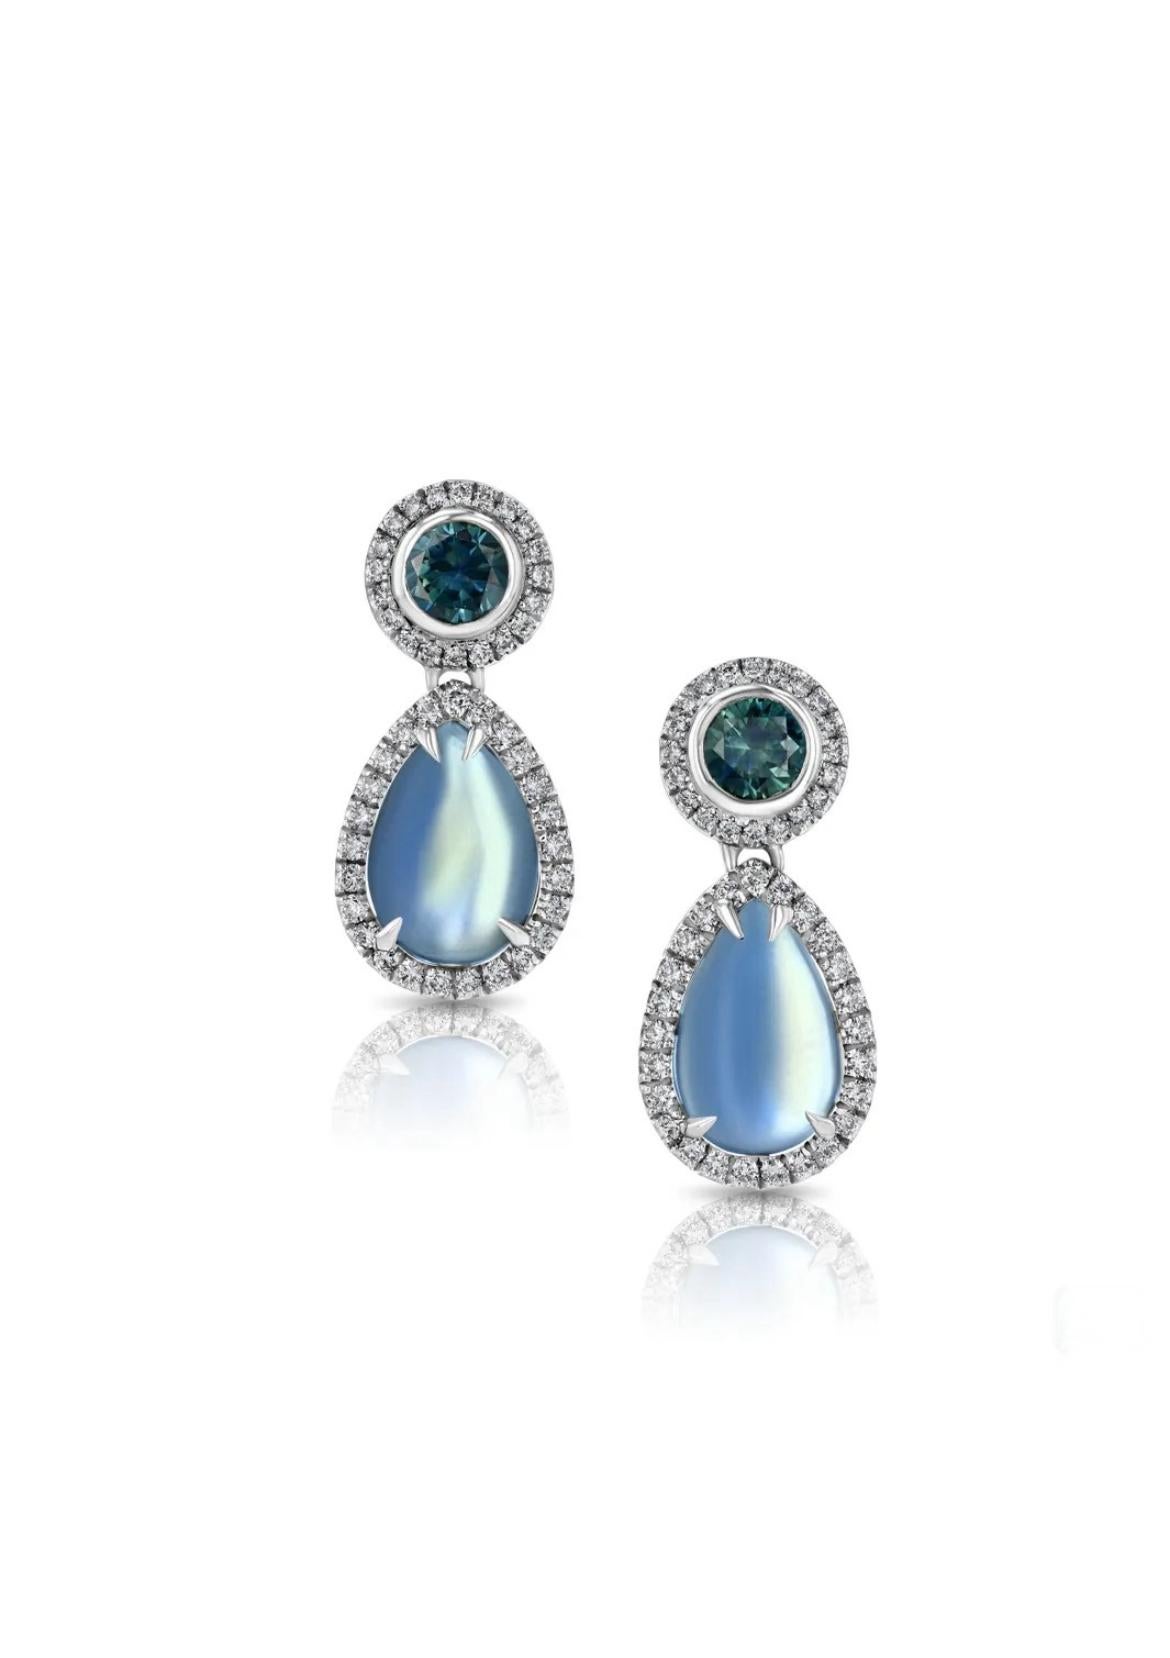 Cabochon 7.64ct Moonstones paired with 1.54ct Montana Sapphires, in 18K earrings. For Sale